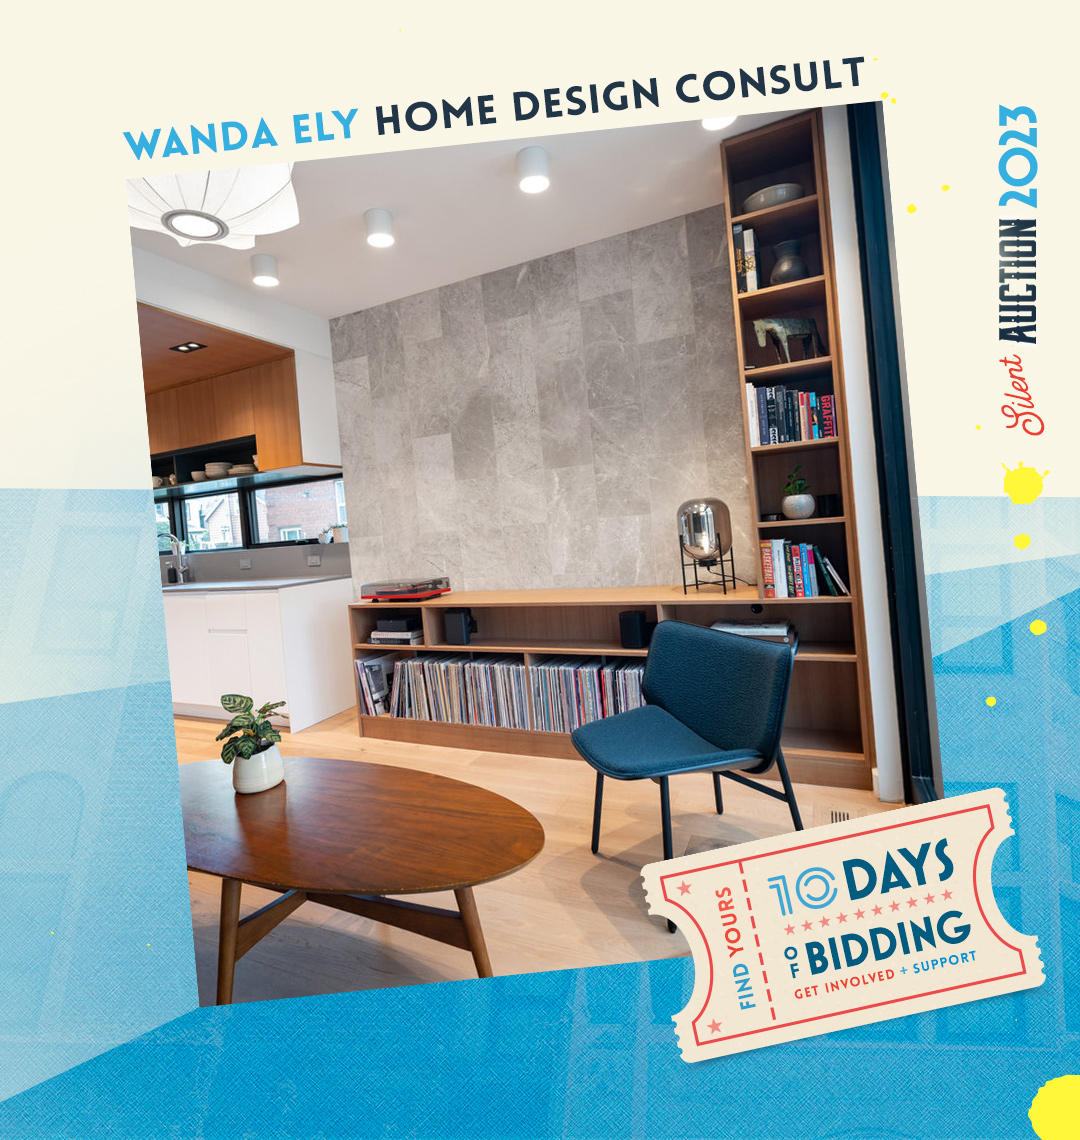 WANDA ELY Home Design Consult image